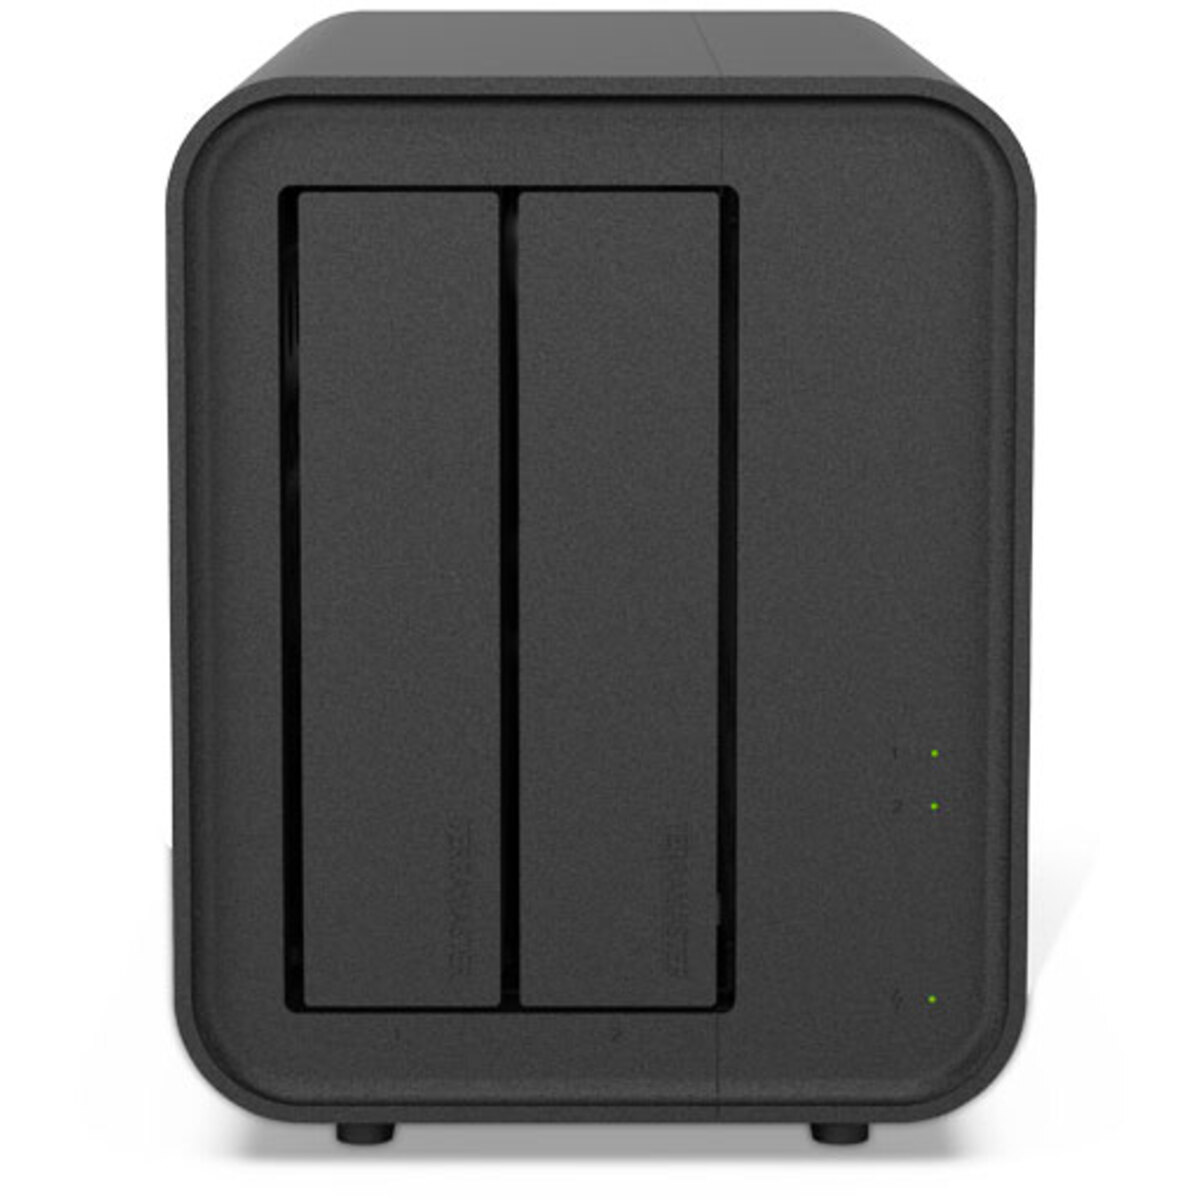 TerraMaster D5 Hybrid 10tb 2-Bay Desktop Multimedia / Power User / Business DAS - Direct Attached Storage Device 1x10tb Seagate IronWolf Pro ST10000NT001 3.5 7200rpm SATA 6Gb/s HDD NAS Class Drives Installed - Burn-In Tested - ON SALE D5 Hybrid